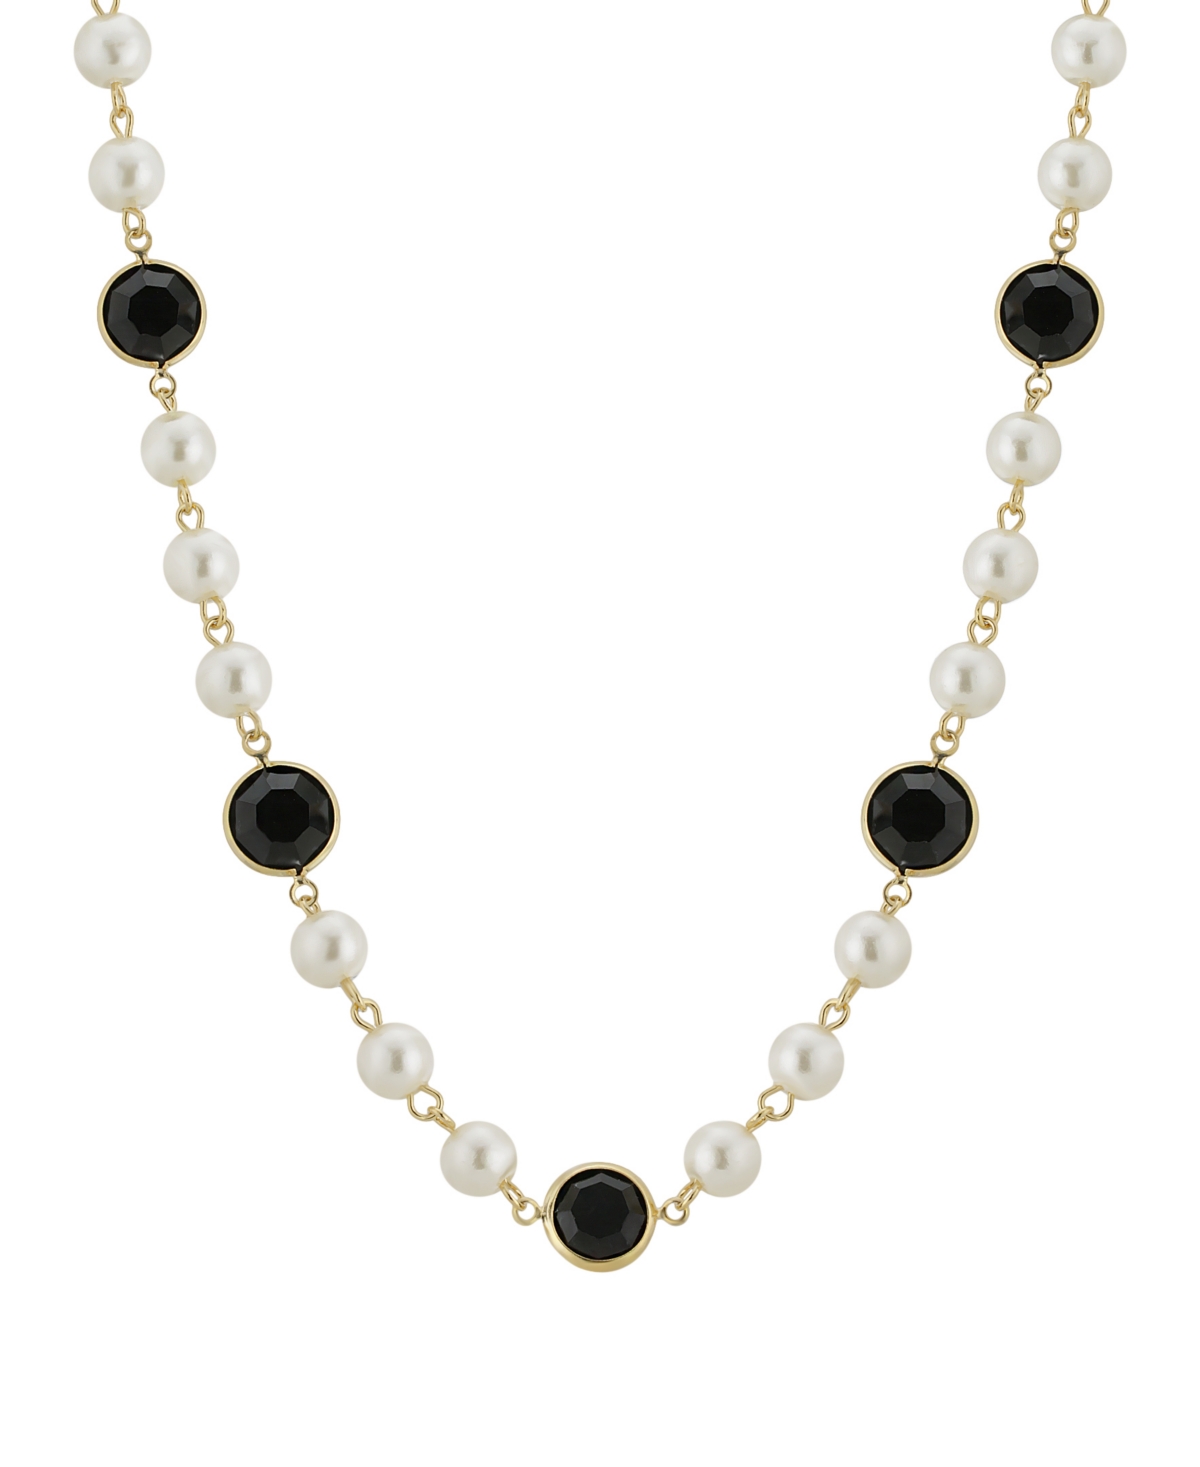 2028 Gold-tone Imitation Pearl With Black Channels 16" Adjustable Necklace